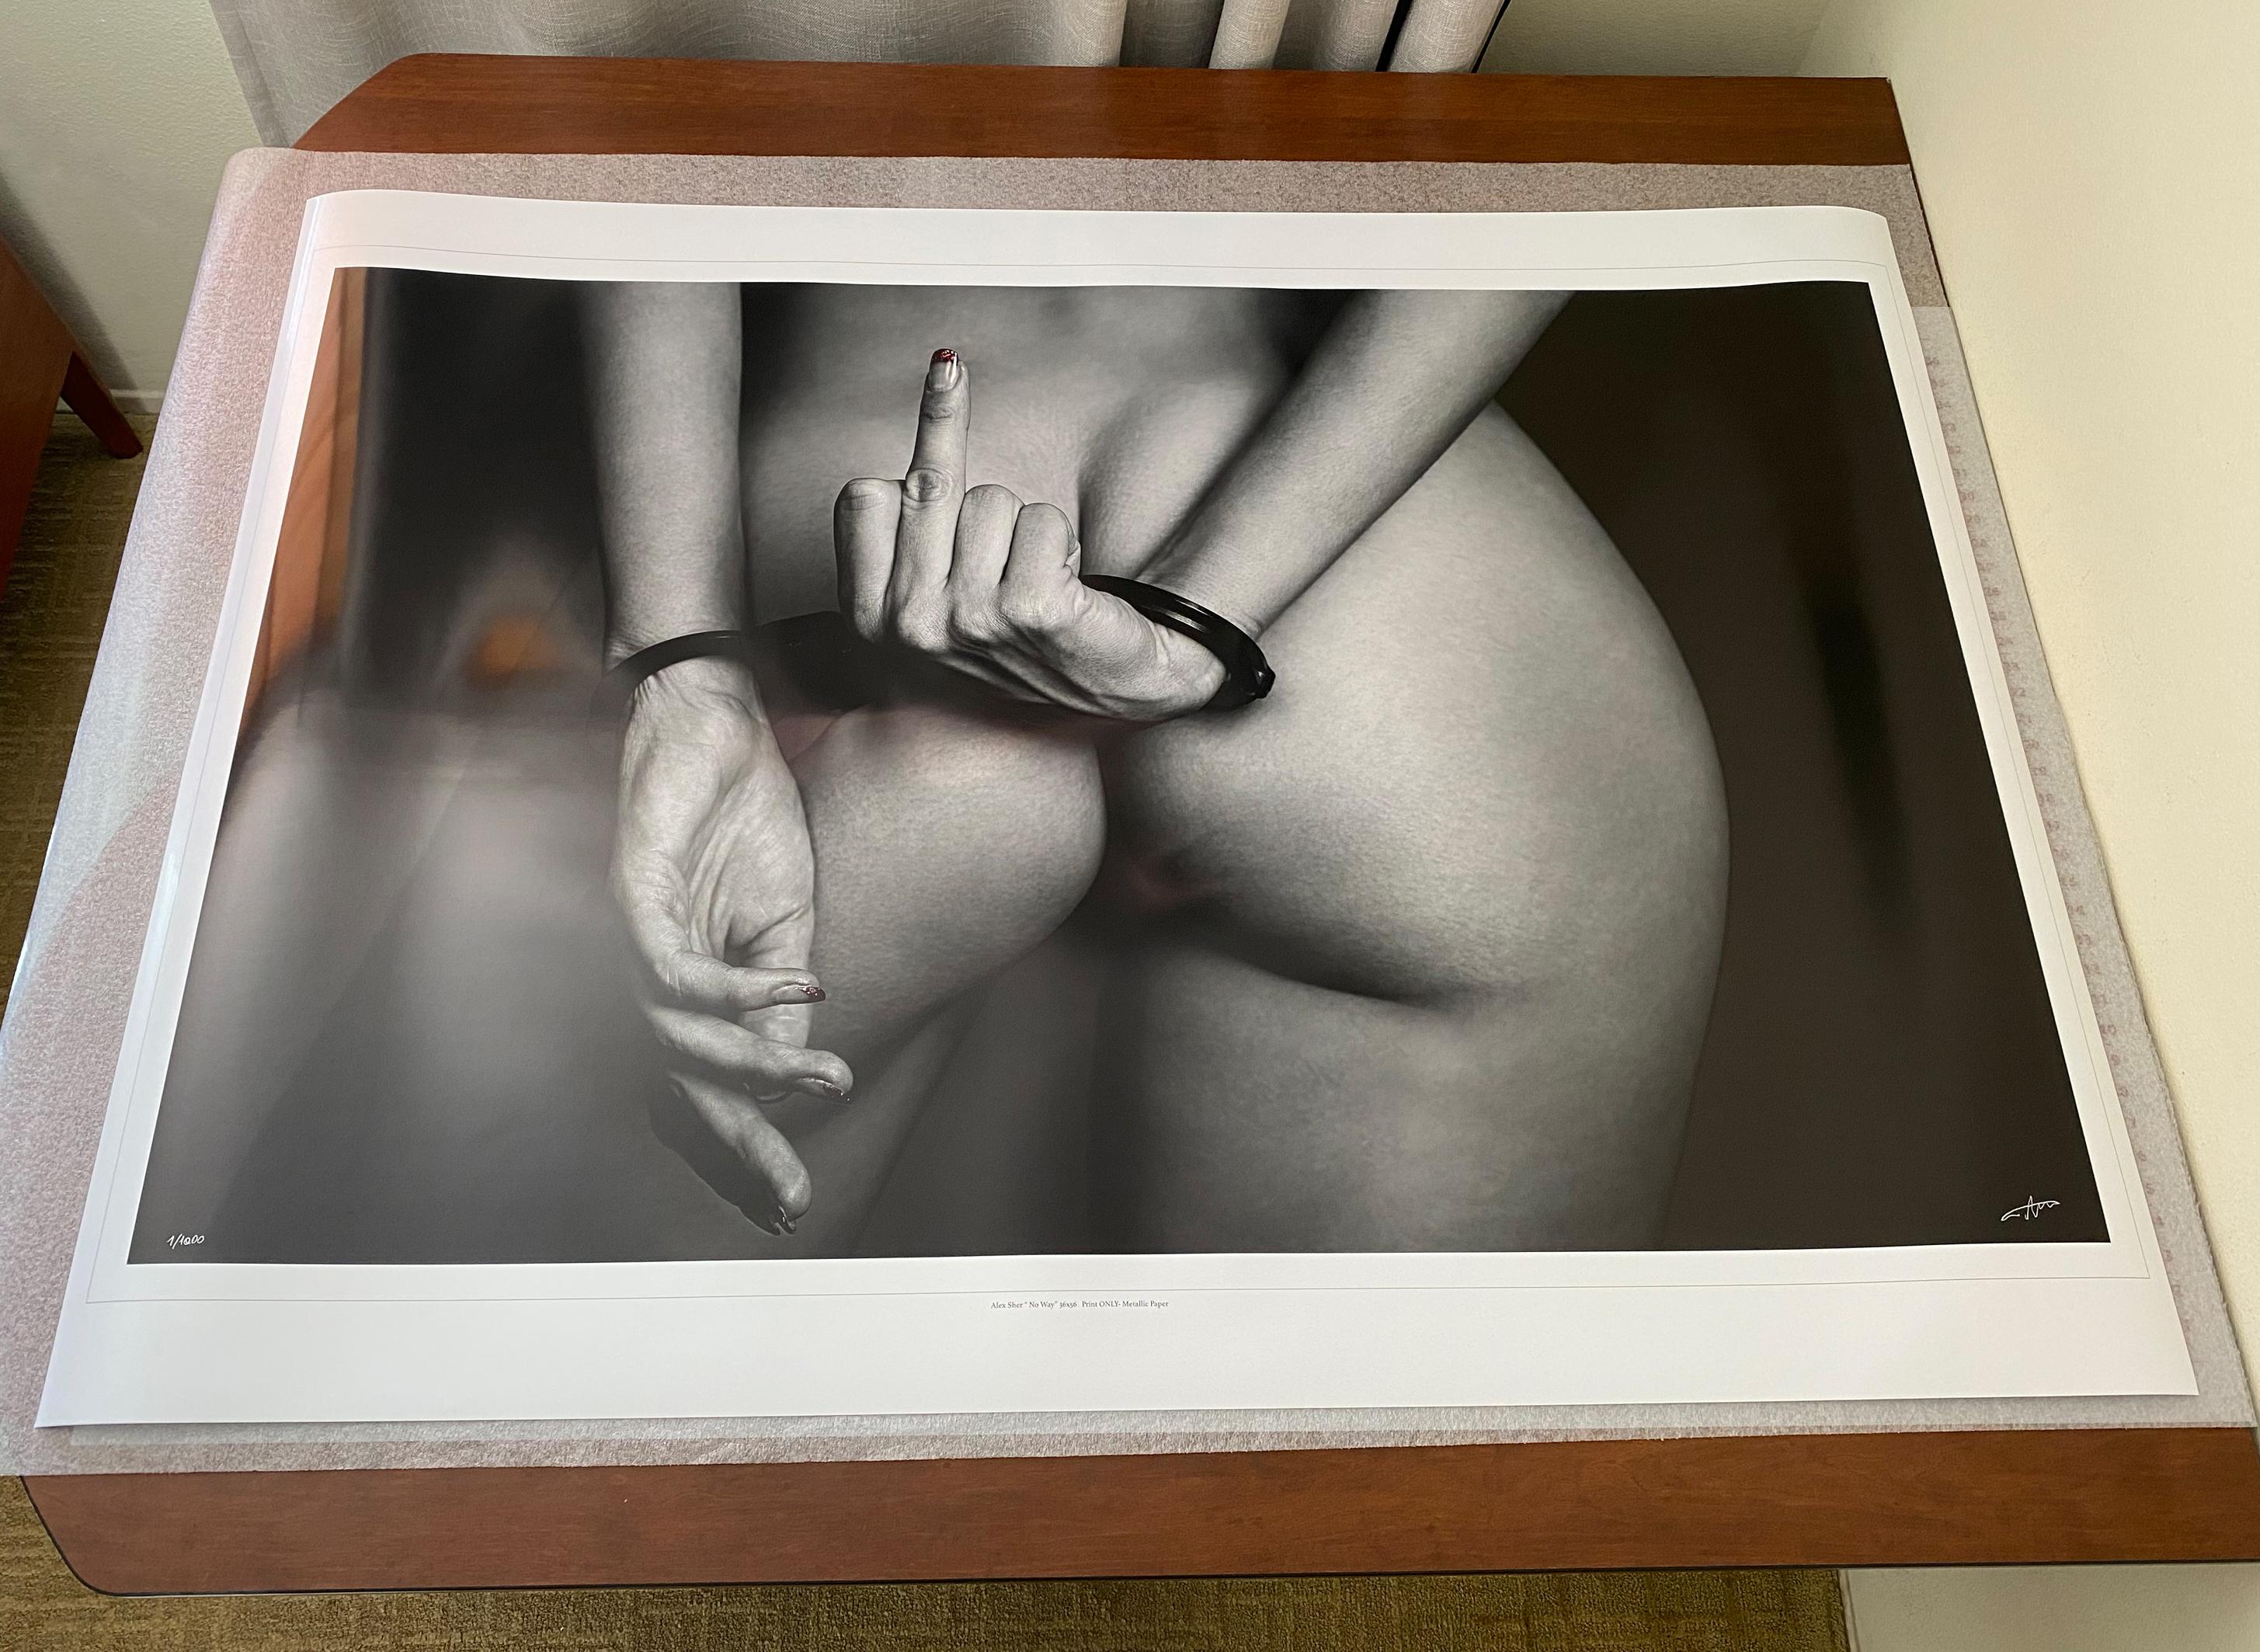 No Way - black & white nude photograph - print on paper 36